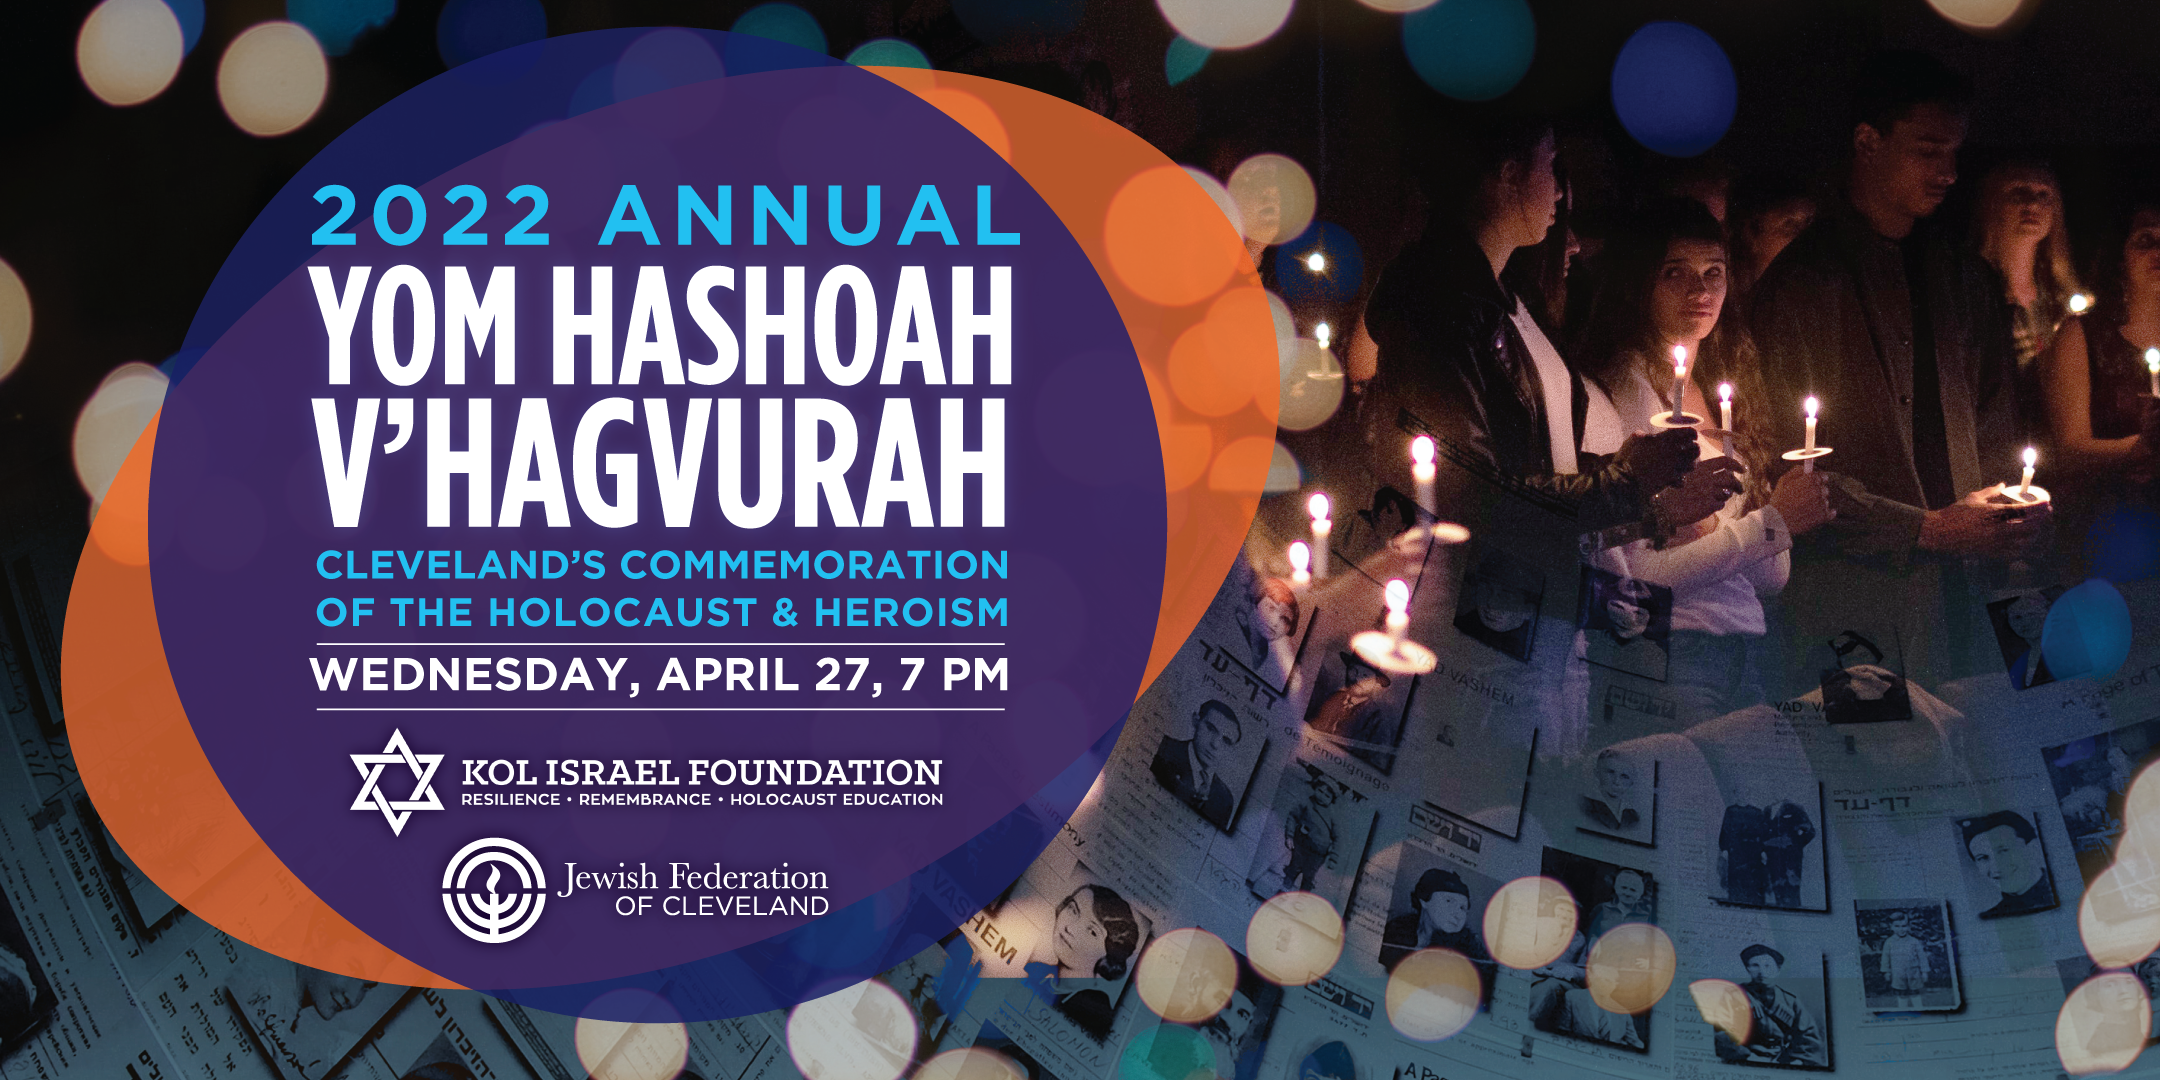 Remember the Holocaust with Yom Hashoah on April 27